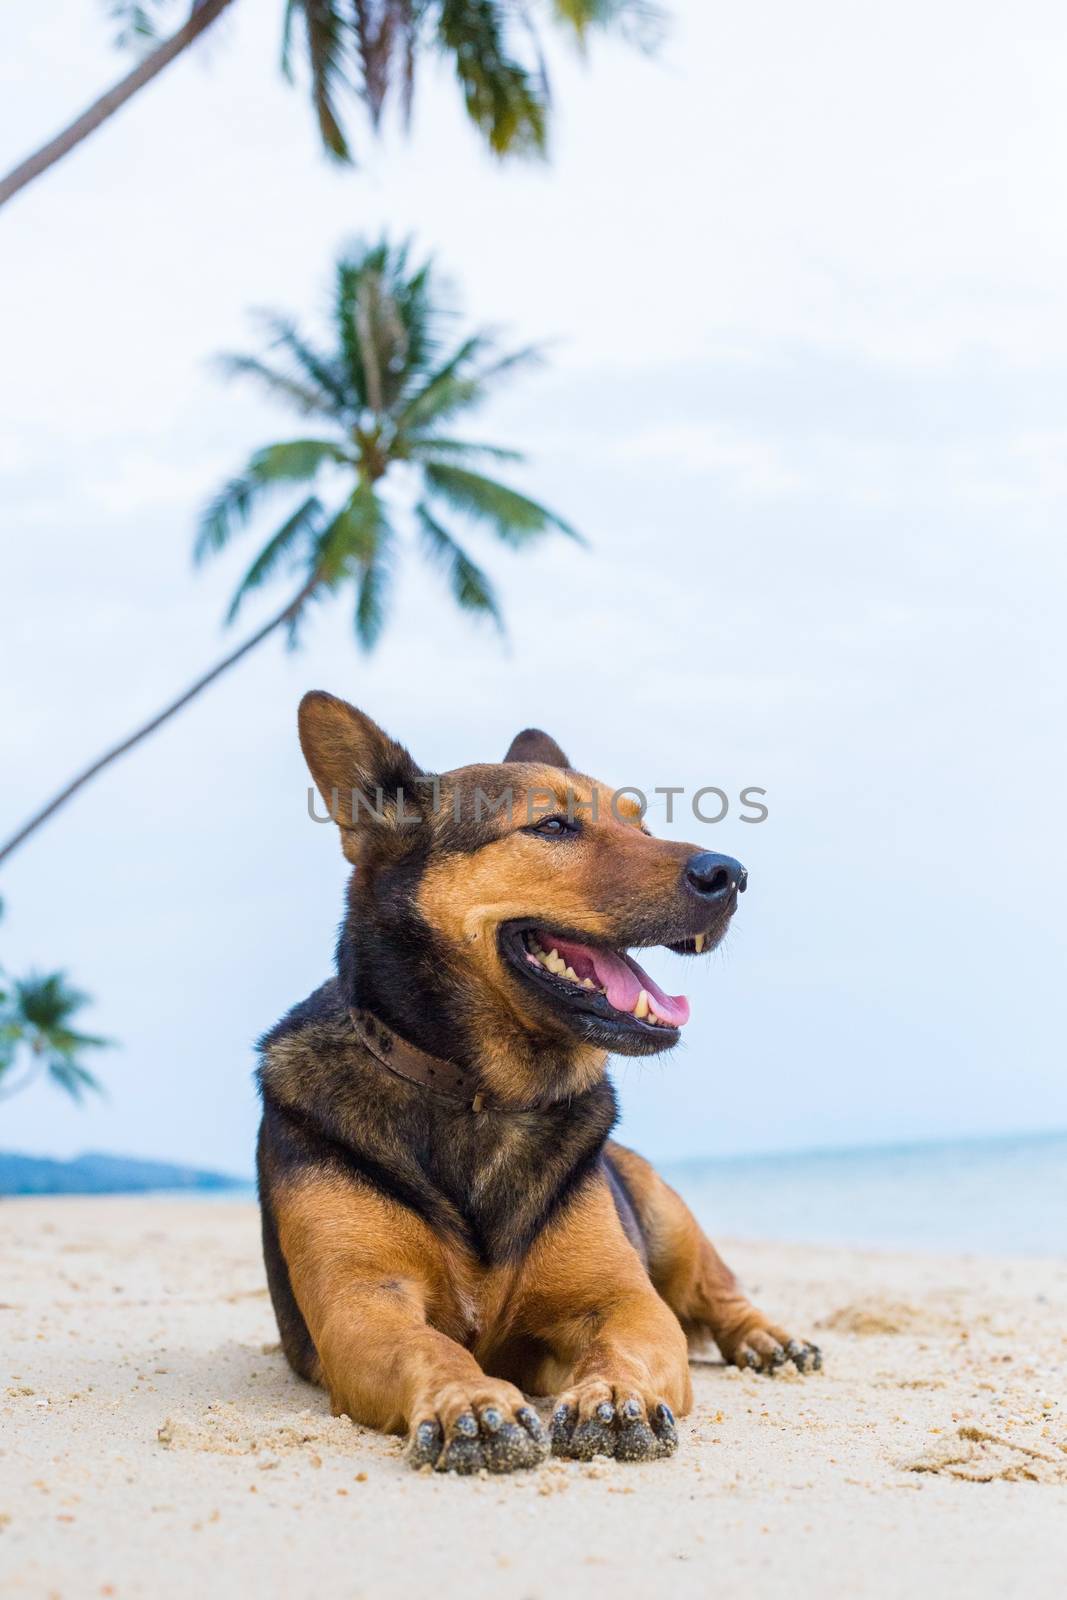 A happy dog on the beach. by Bowonpat